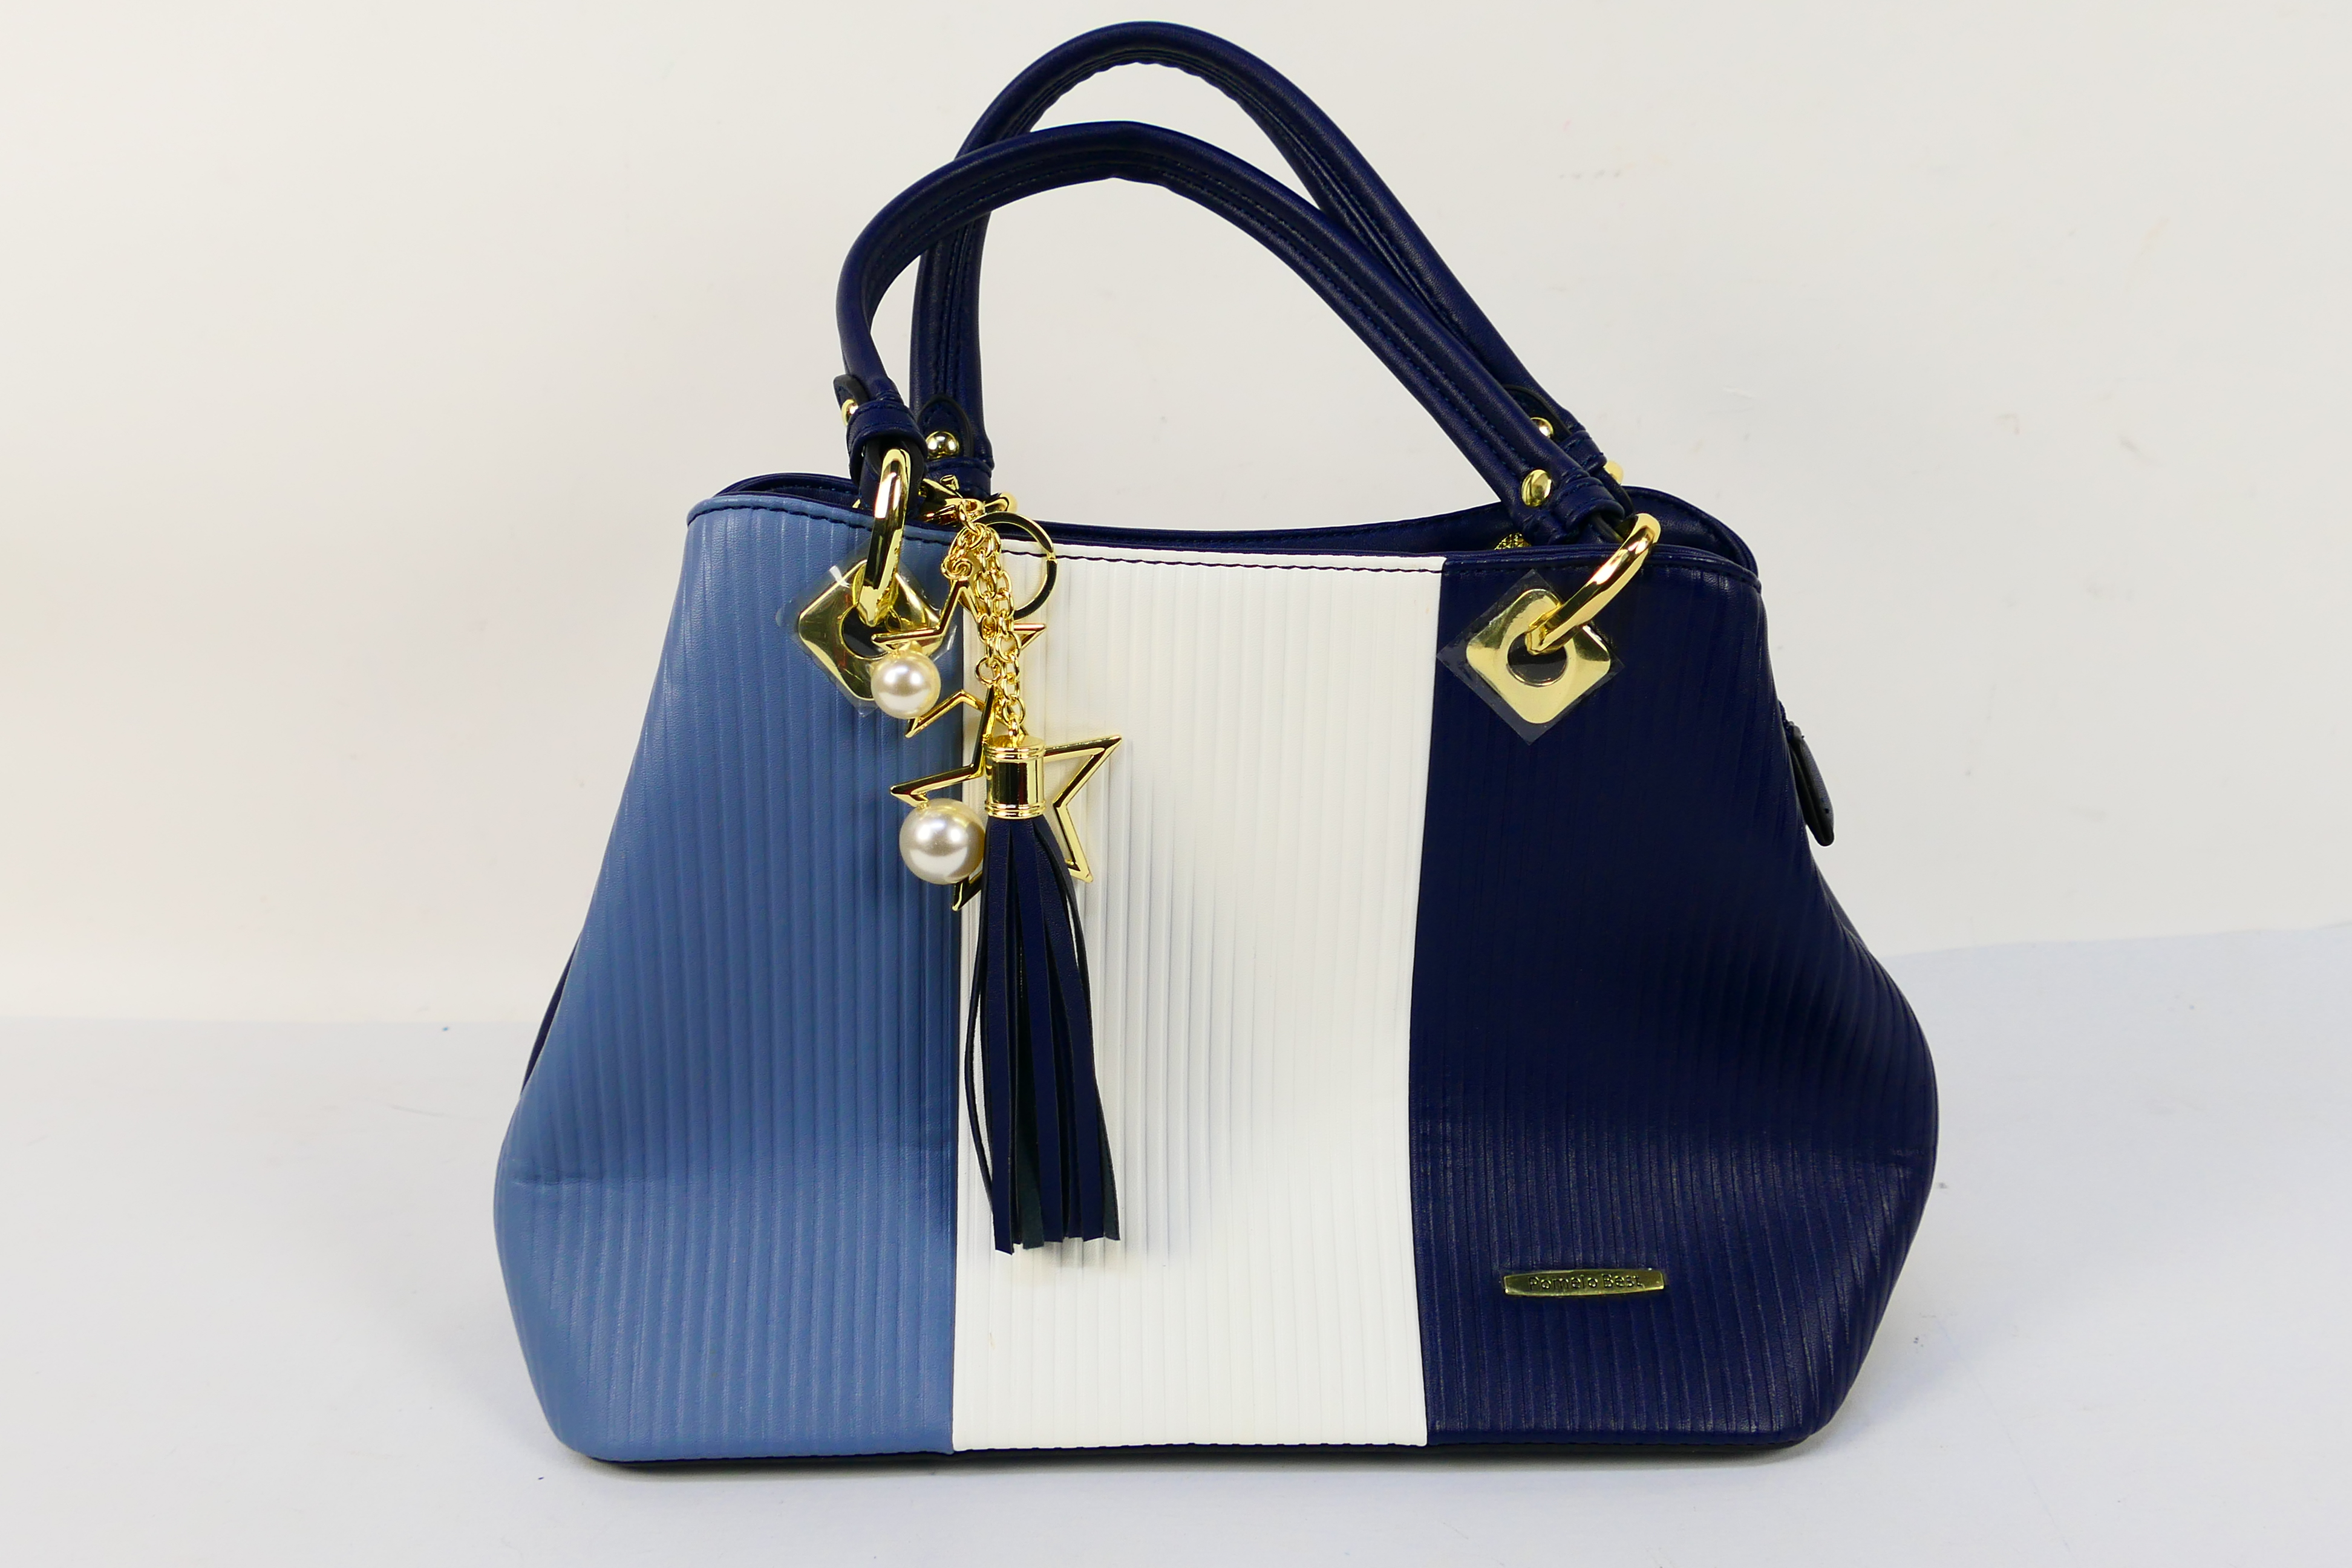 Pomelo Best - A Pomelo Best handbag in tones of blue and white.